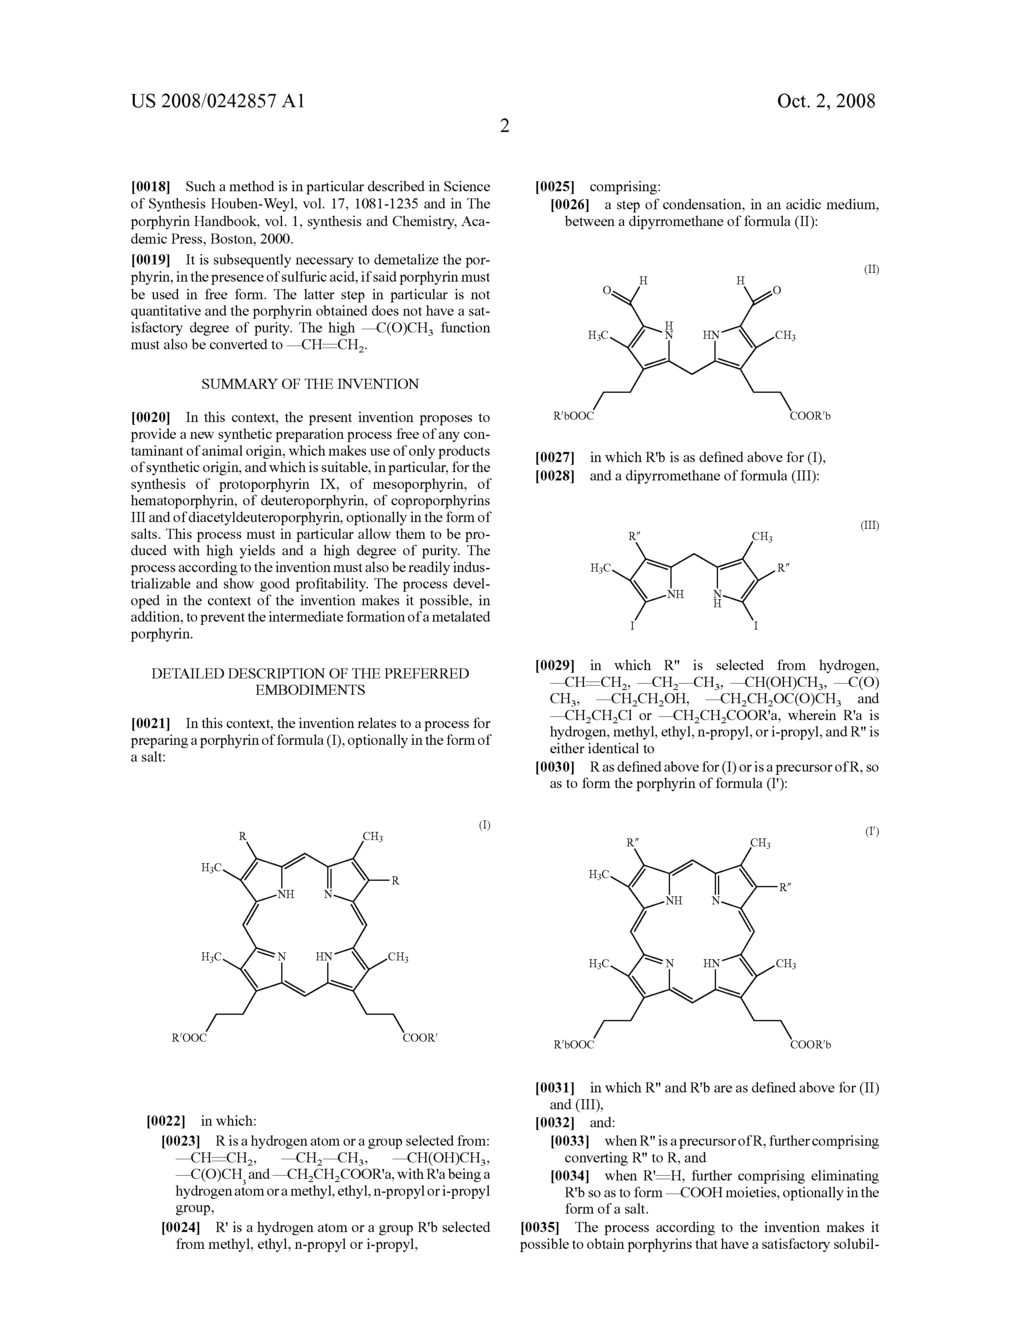 Process For Preparing Porphyrin Derivatives, Such As Protoporphyrin (IX) And Synthesis Intermediates - diagram, schematic, and image 03